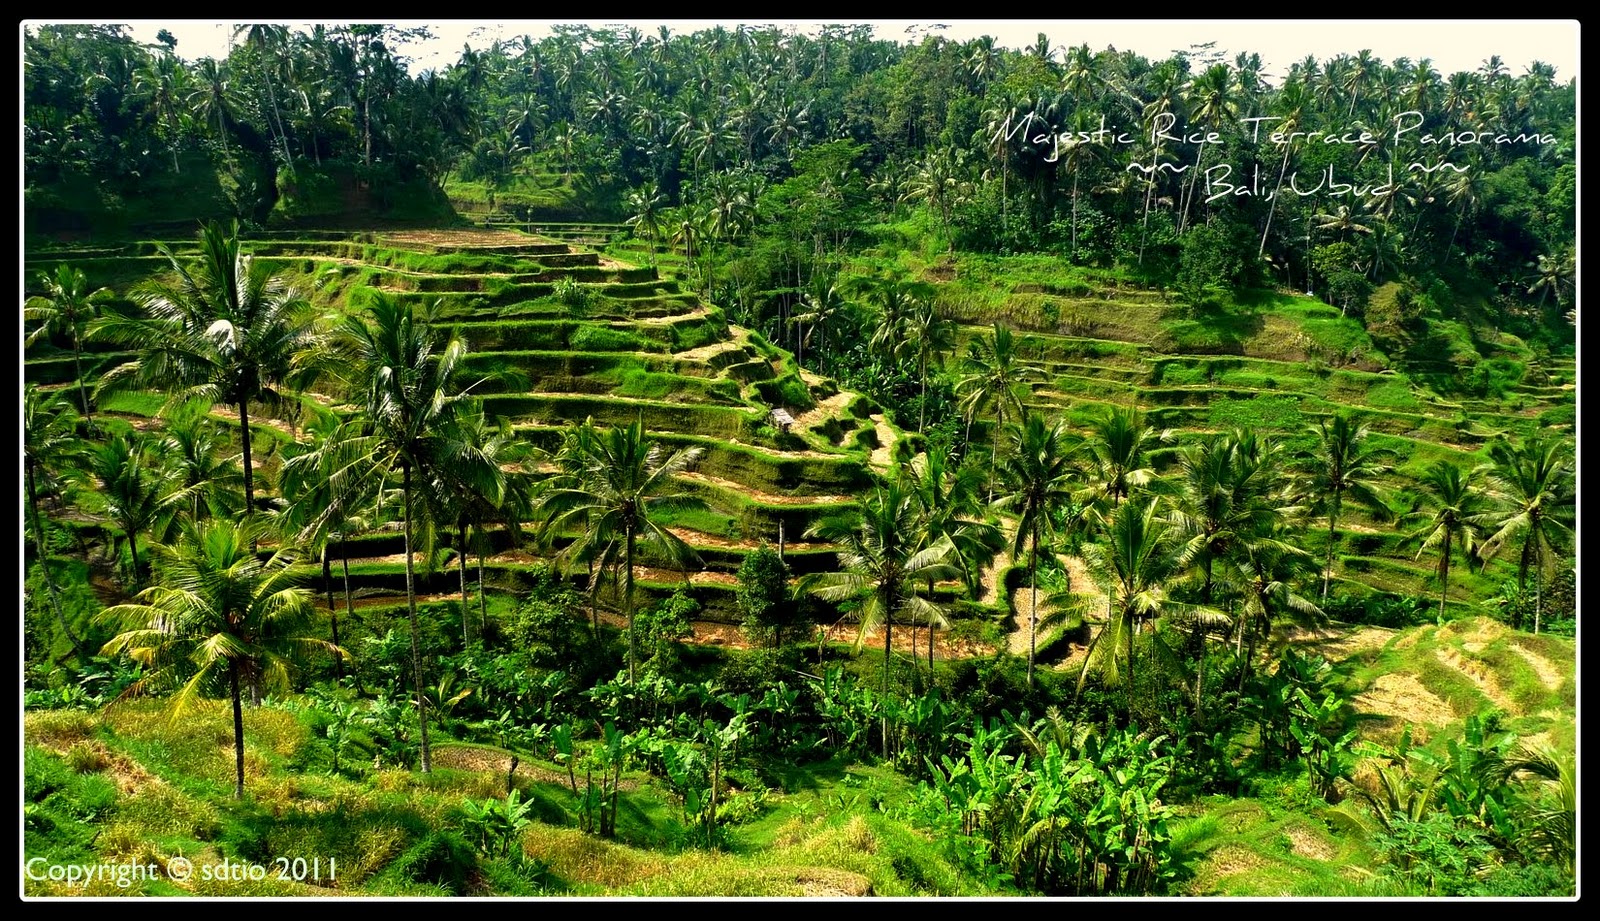 Download this Ubud The Cultural... picture